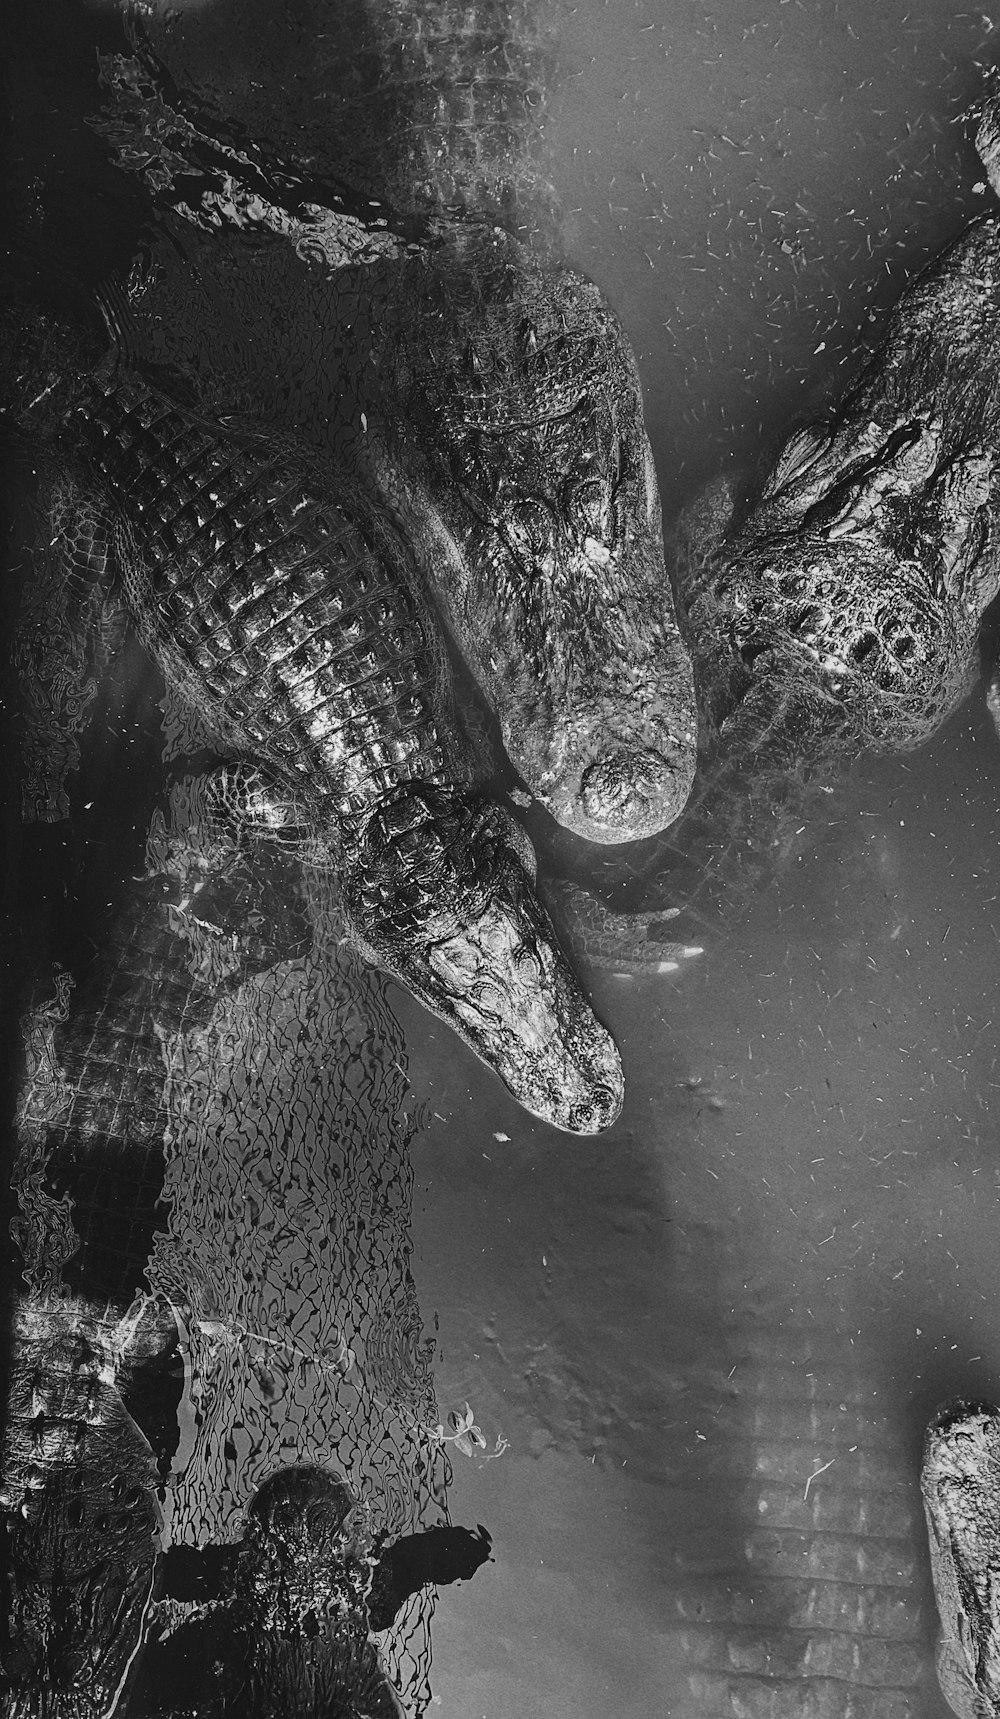 a group of alligators swimming in a body of water